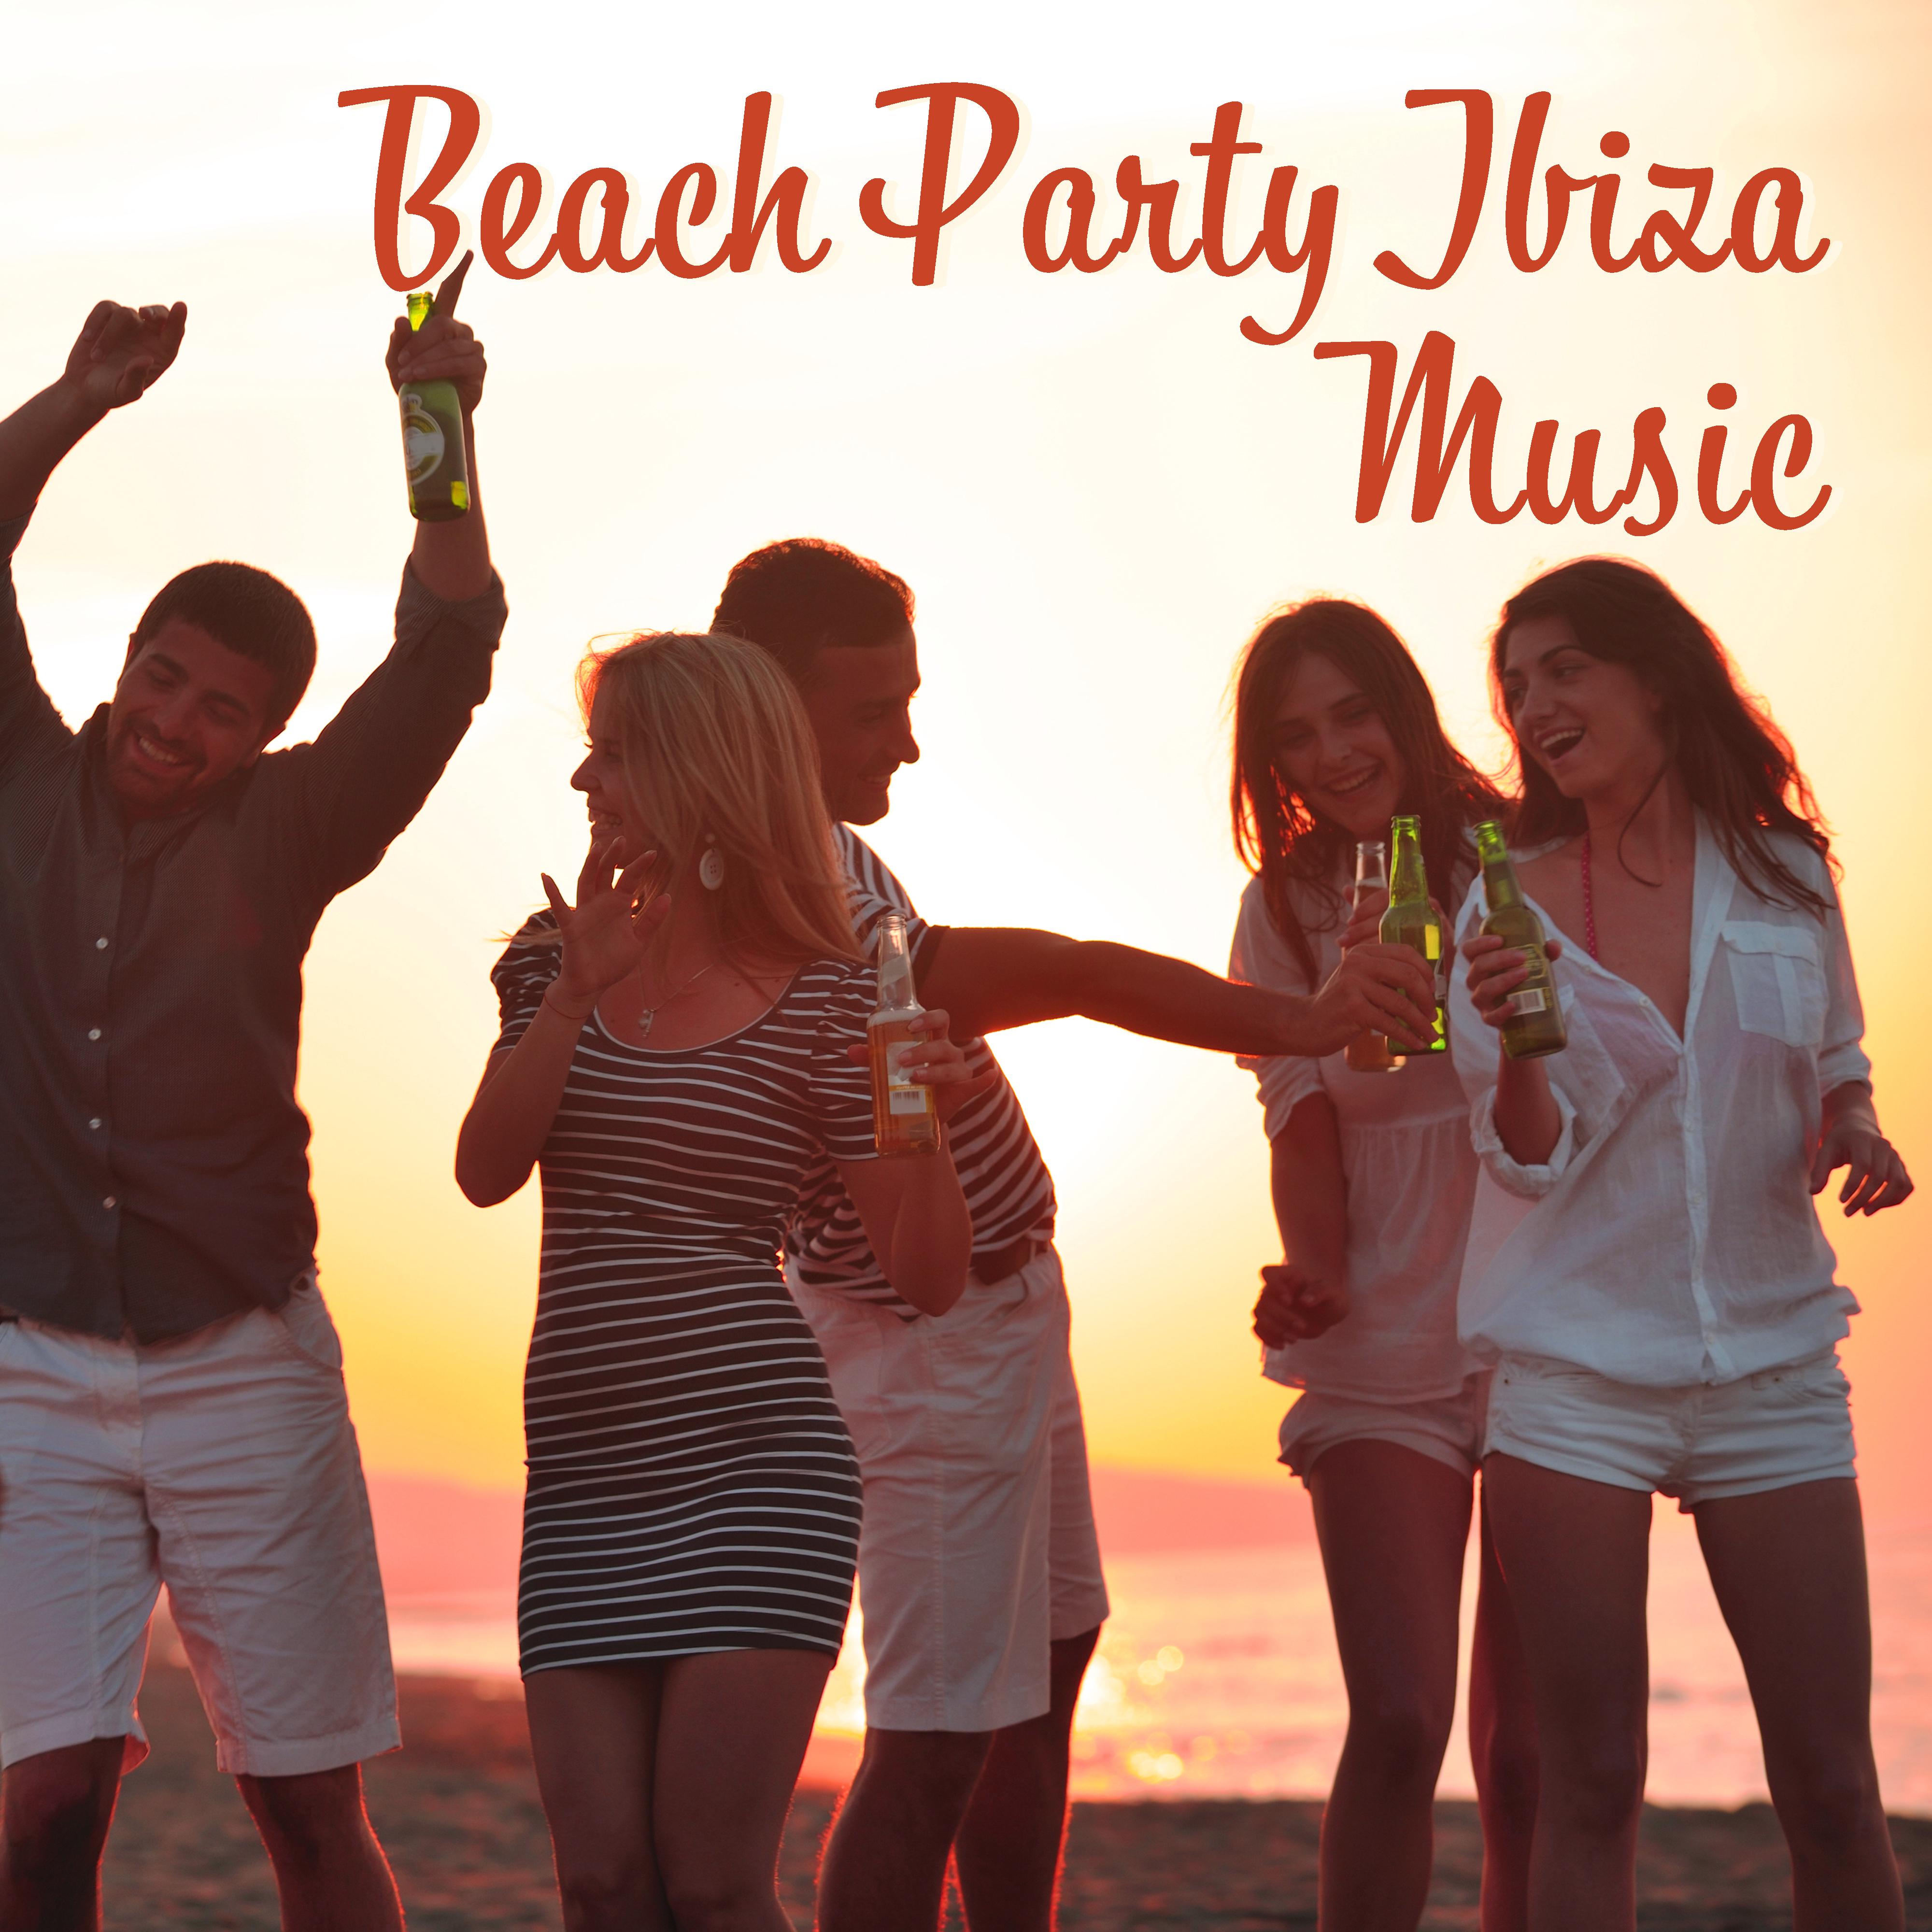 Beach Party Ibiza Music  Summer Music, Beach Party Sounds, Holiday Dance Vibes, Chill Out 2017